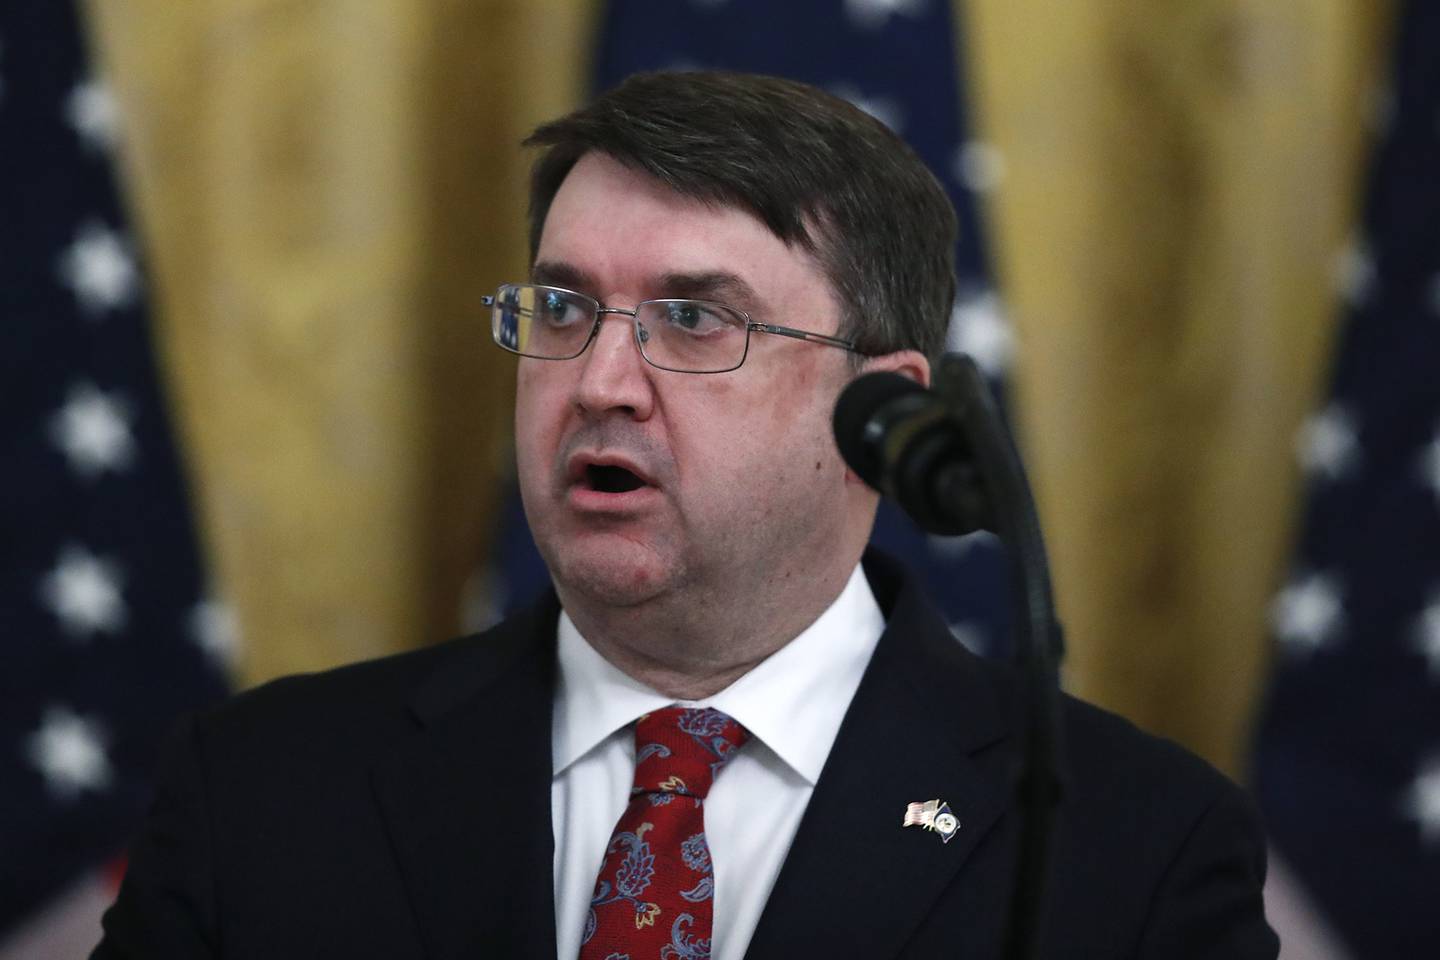 Veterans Affairs Secretary Robert Wilkie speaks about protecting seniors, in the East Room of the White House, Thursday, April 30, 2020, in Washington.